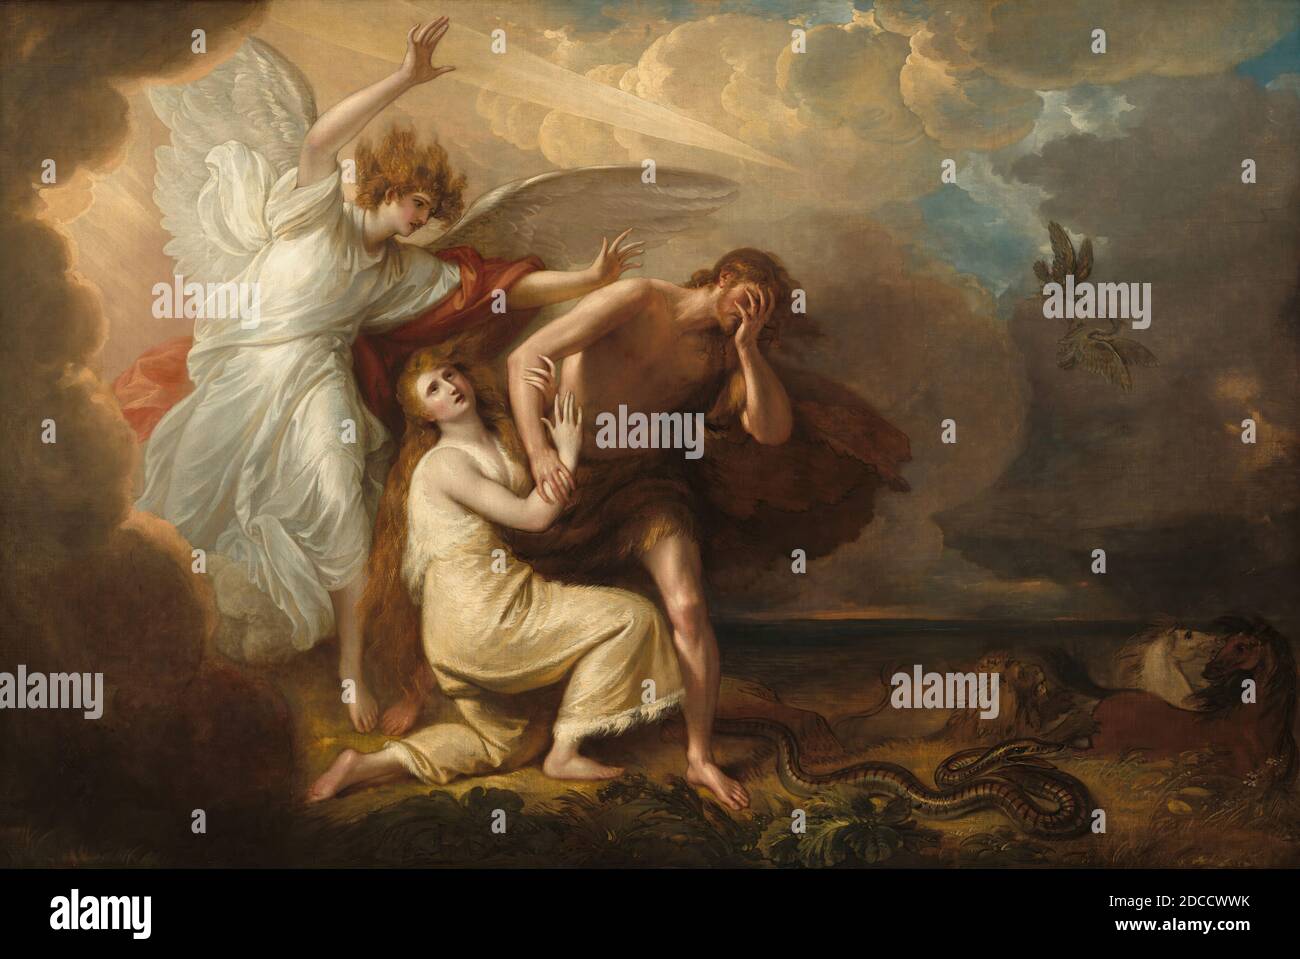 Benjamin West, (painter), American, 1738 - 1820, The Expulsion of Adam and Eve from Paradise, 1791, oil on canvas, overall: 186.8 x 278.1 cm (73 9/16 x 109 1/2 in.), By 1779, Benjamin West had conceived his life's 'great work,' intending to rebuild the Royal Chapel at Windsor Castle as a shrine to Revealed Religion. After sponsoring the elaborate scheme for two decades, George III abruptly canceled it in 1801. Though the overall project was abandoned, many individual paintings, including this nine–foot–long, Expulsion, were completed Stock Photo